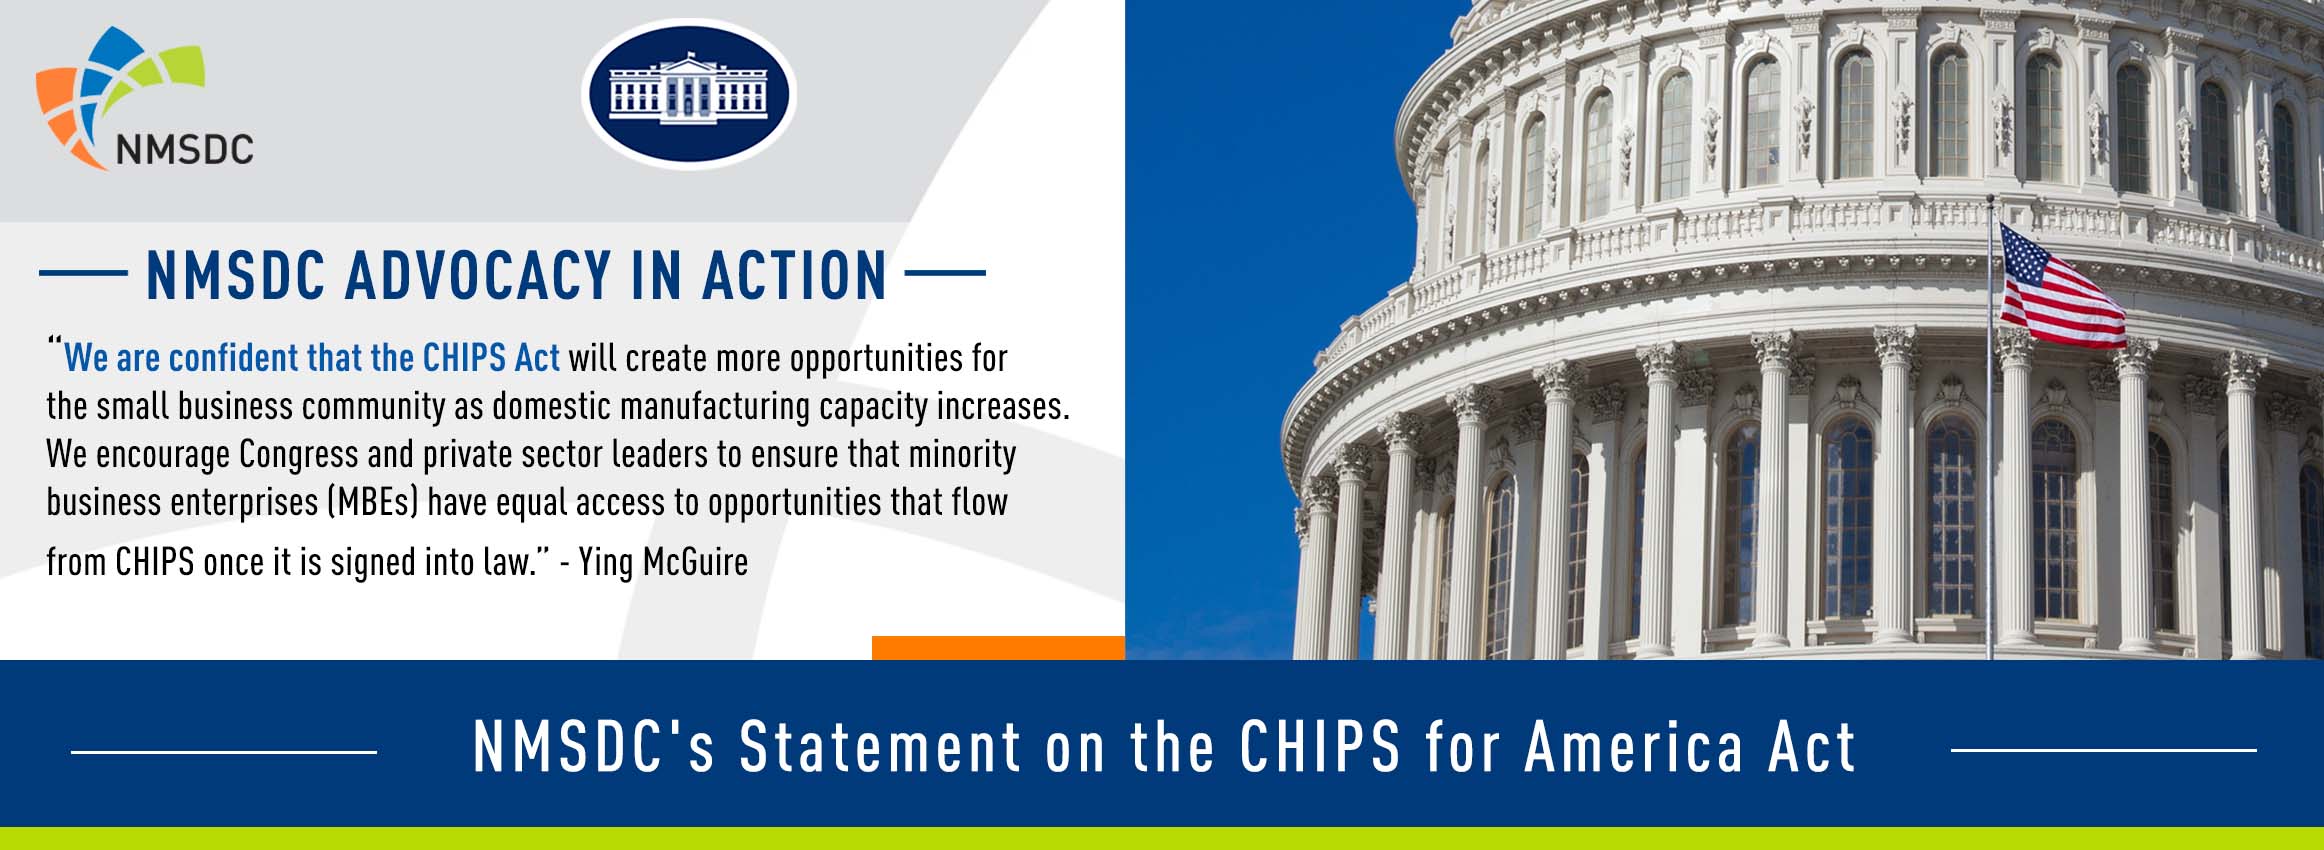 CHIPS for America Act